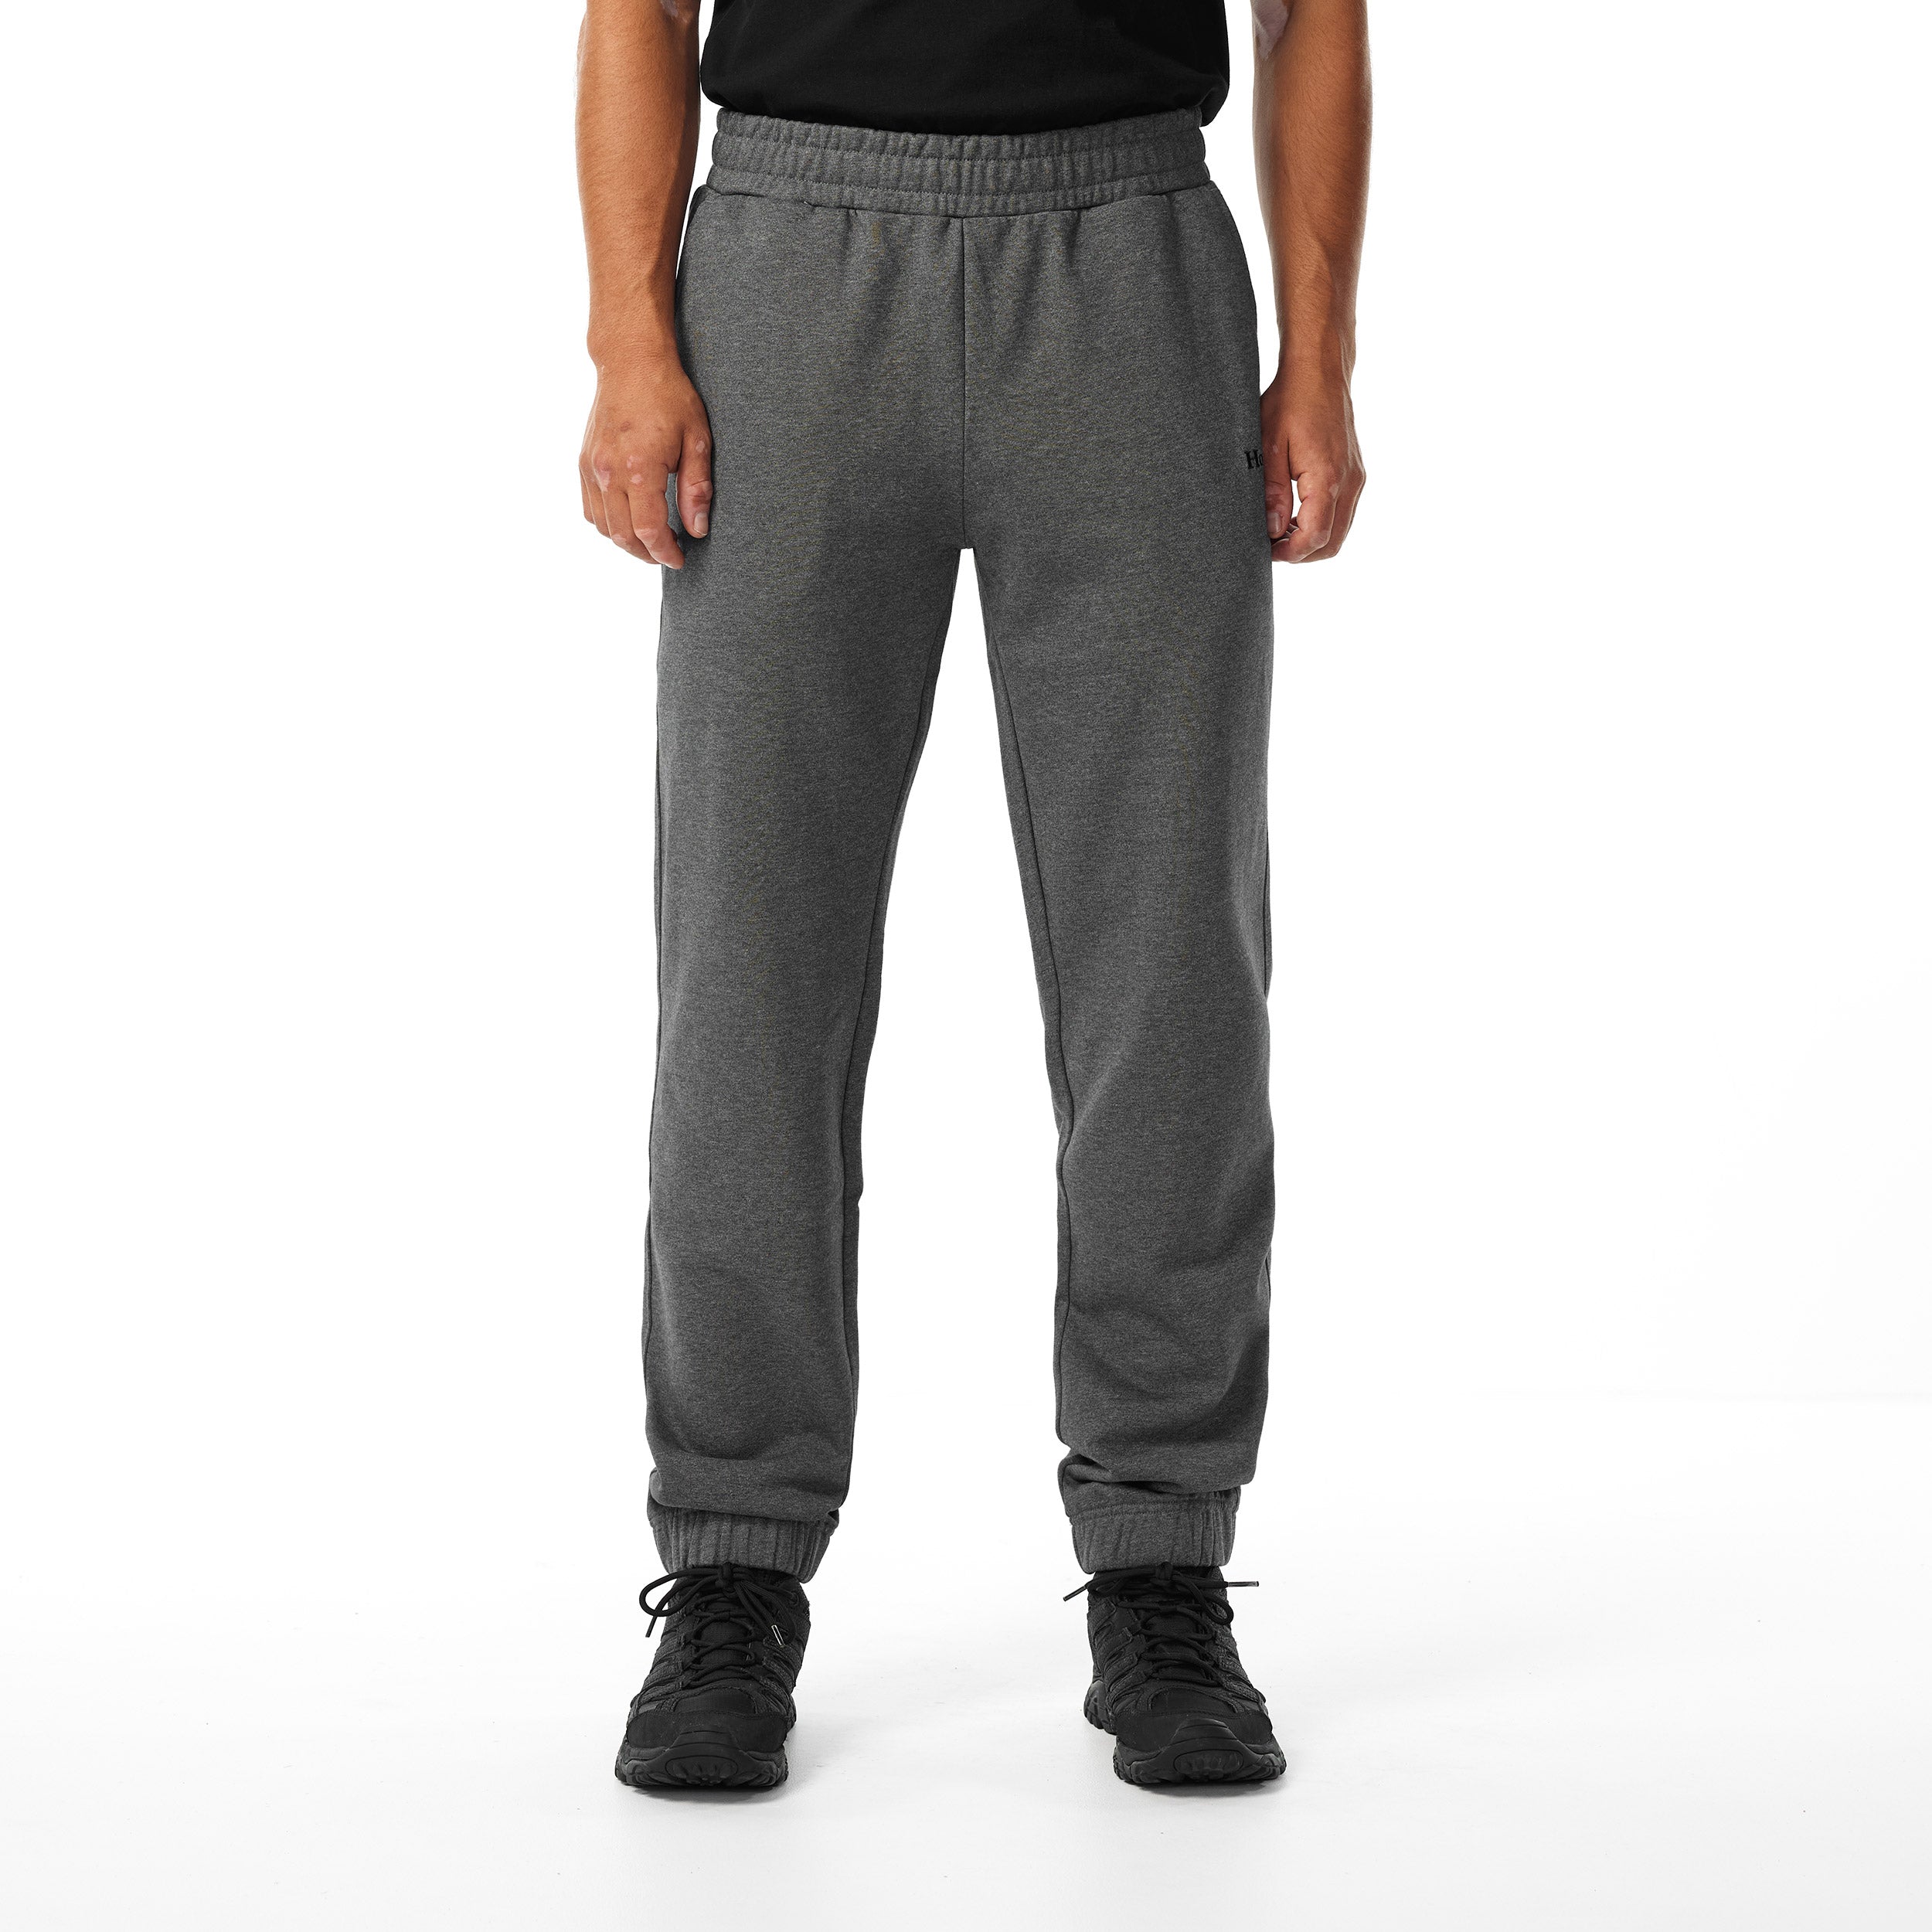 fabstieve Men's NS Relaxed Fit Trackpants (VK-306) Grey 